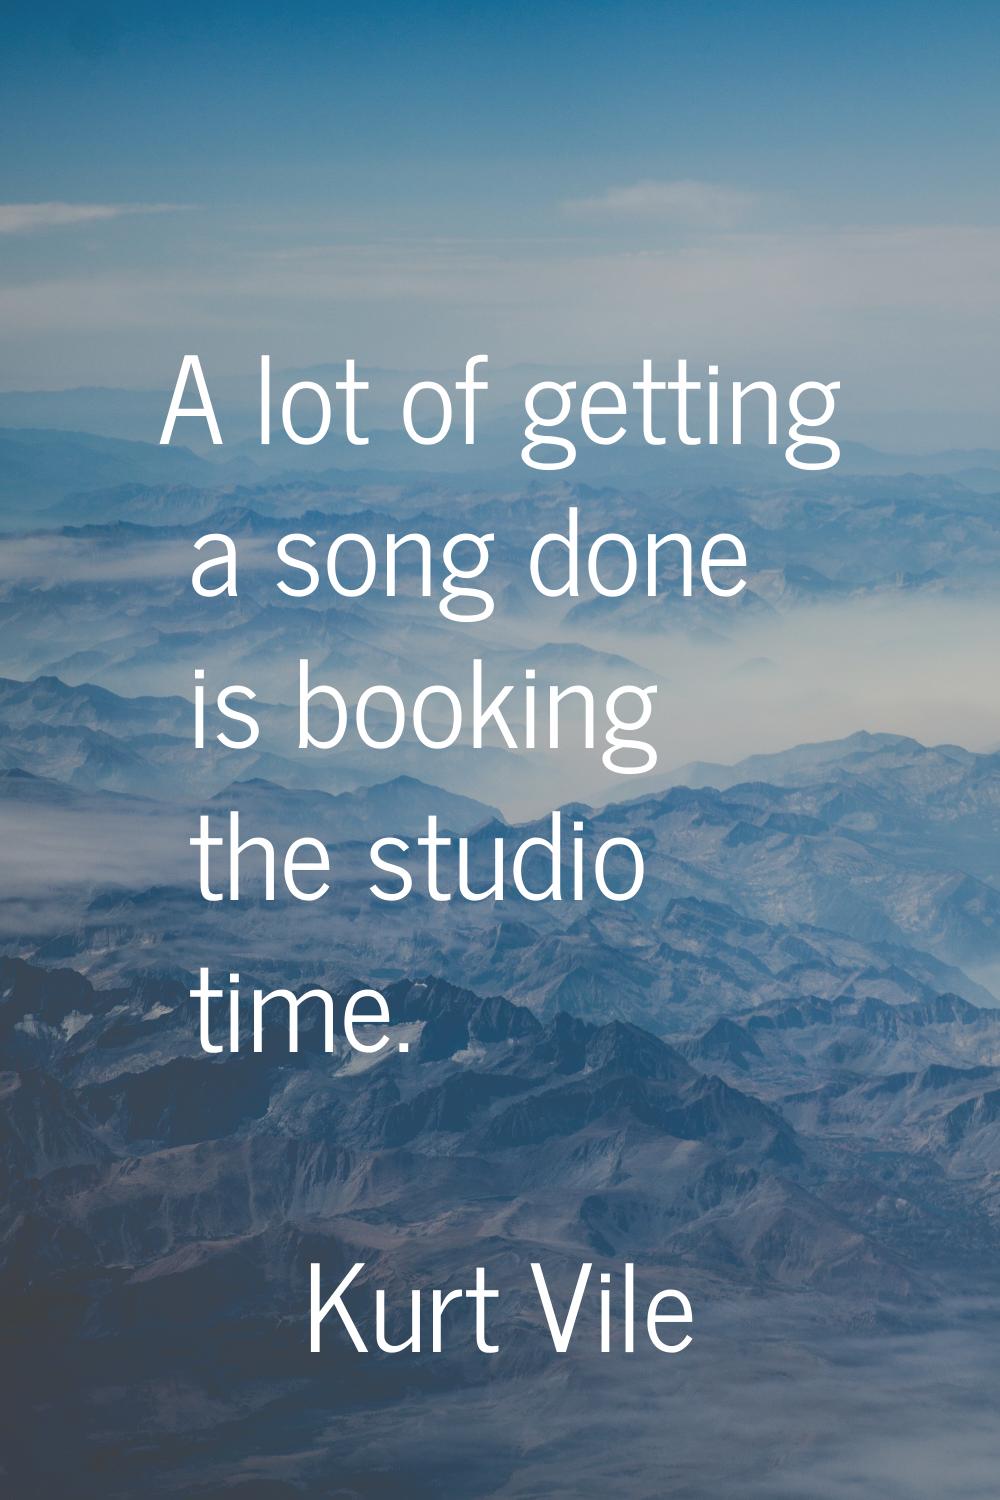 A lot of getting a song done is booking the studio time.